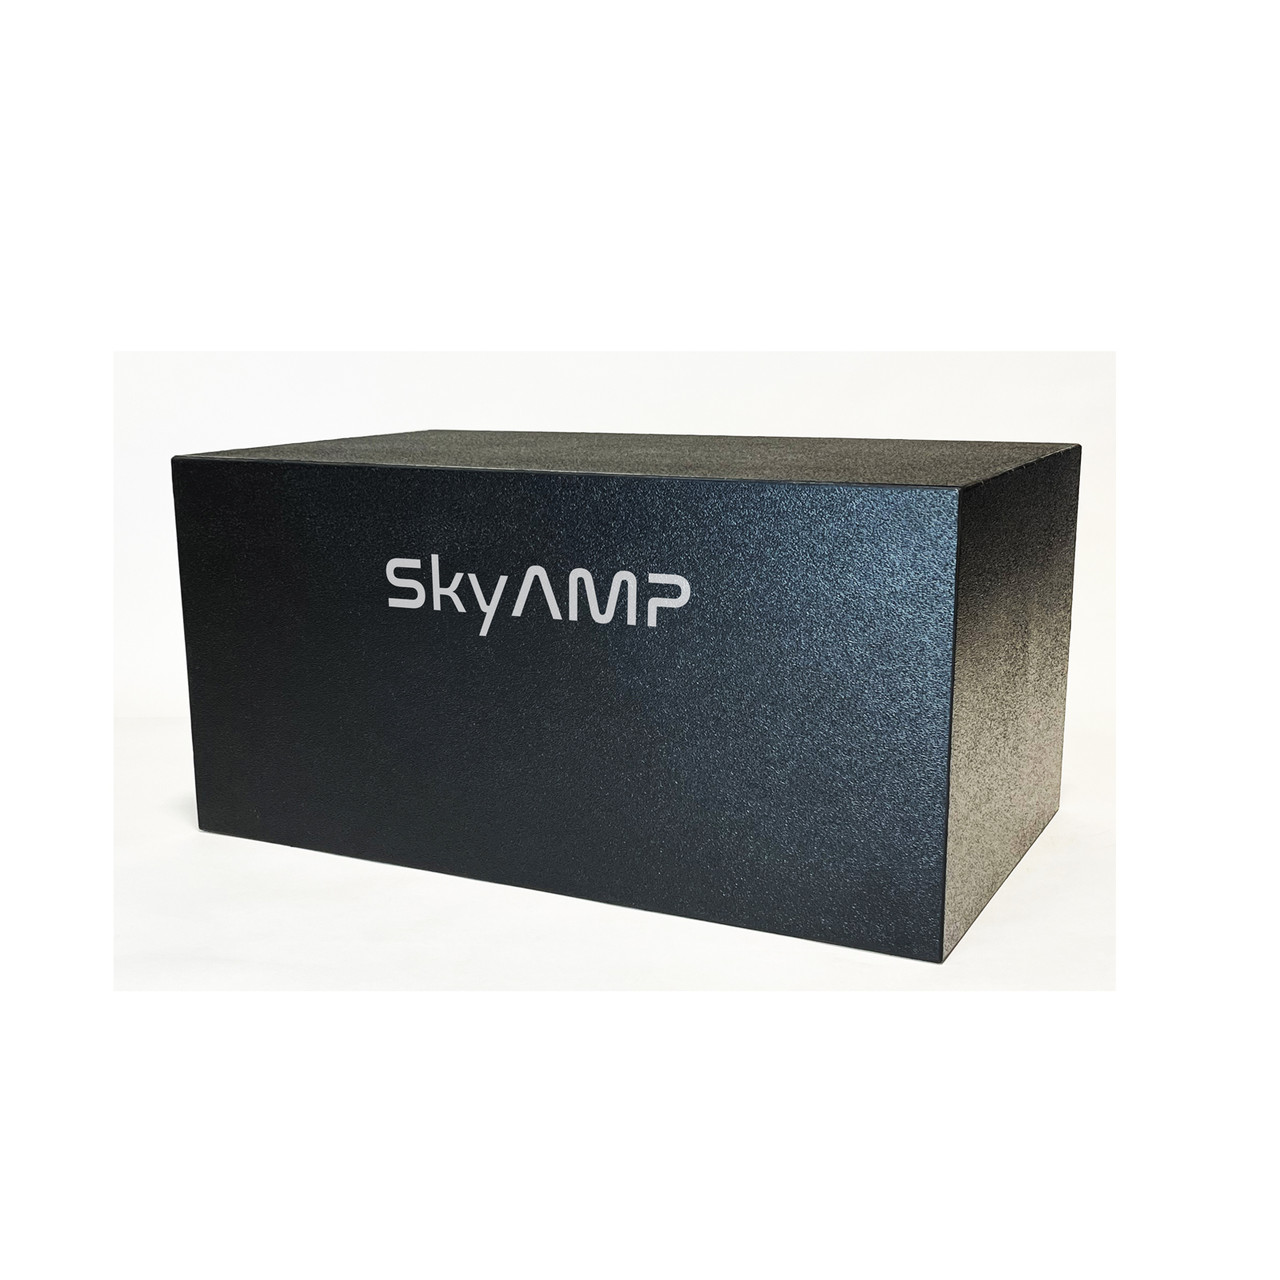 SkyAMP Pro SAPOM6 Enterprise class Cellular (4G), WiFi (2.4 GHz), and Bluetooth signal booster with 1,000 ft range.